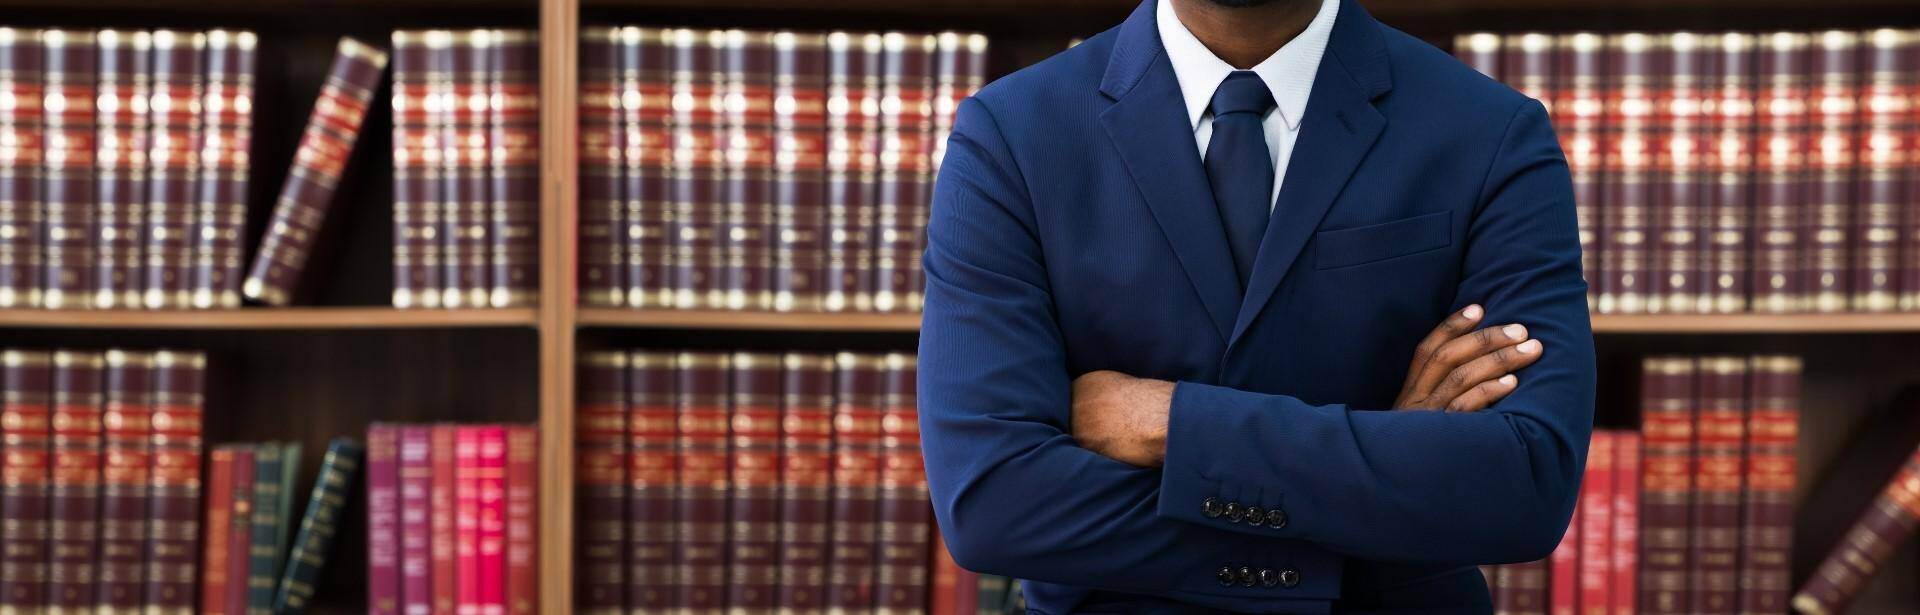 A black lawyer standing in front of a bookshelf of law book in East-Point, Georgia